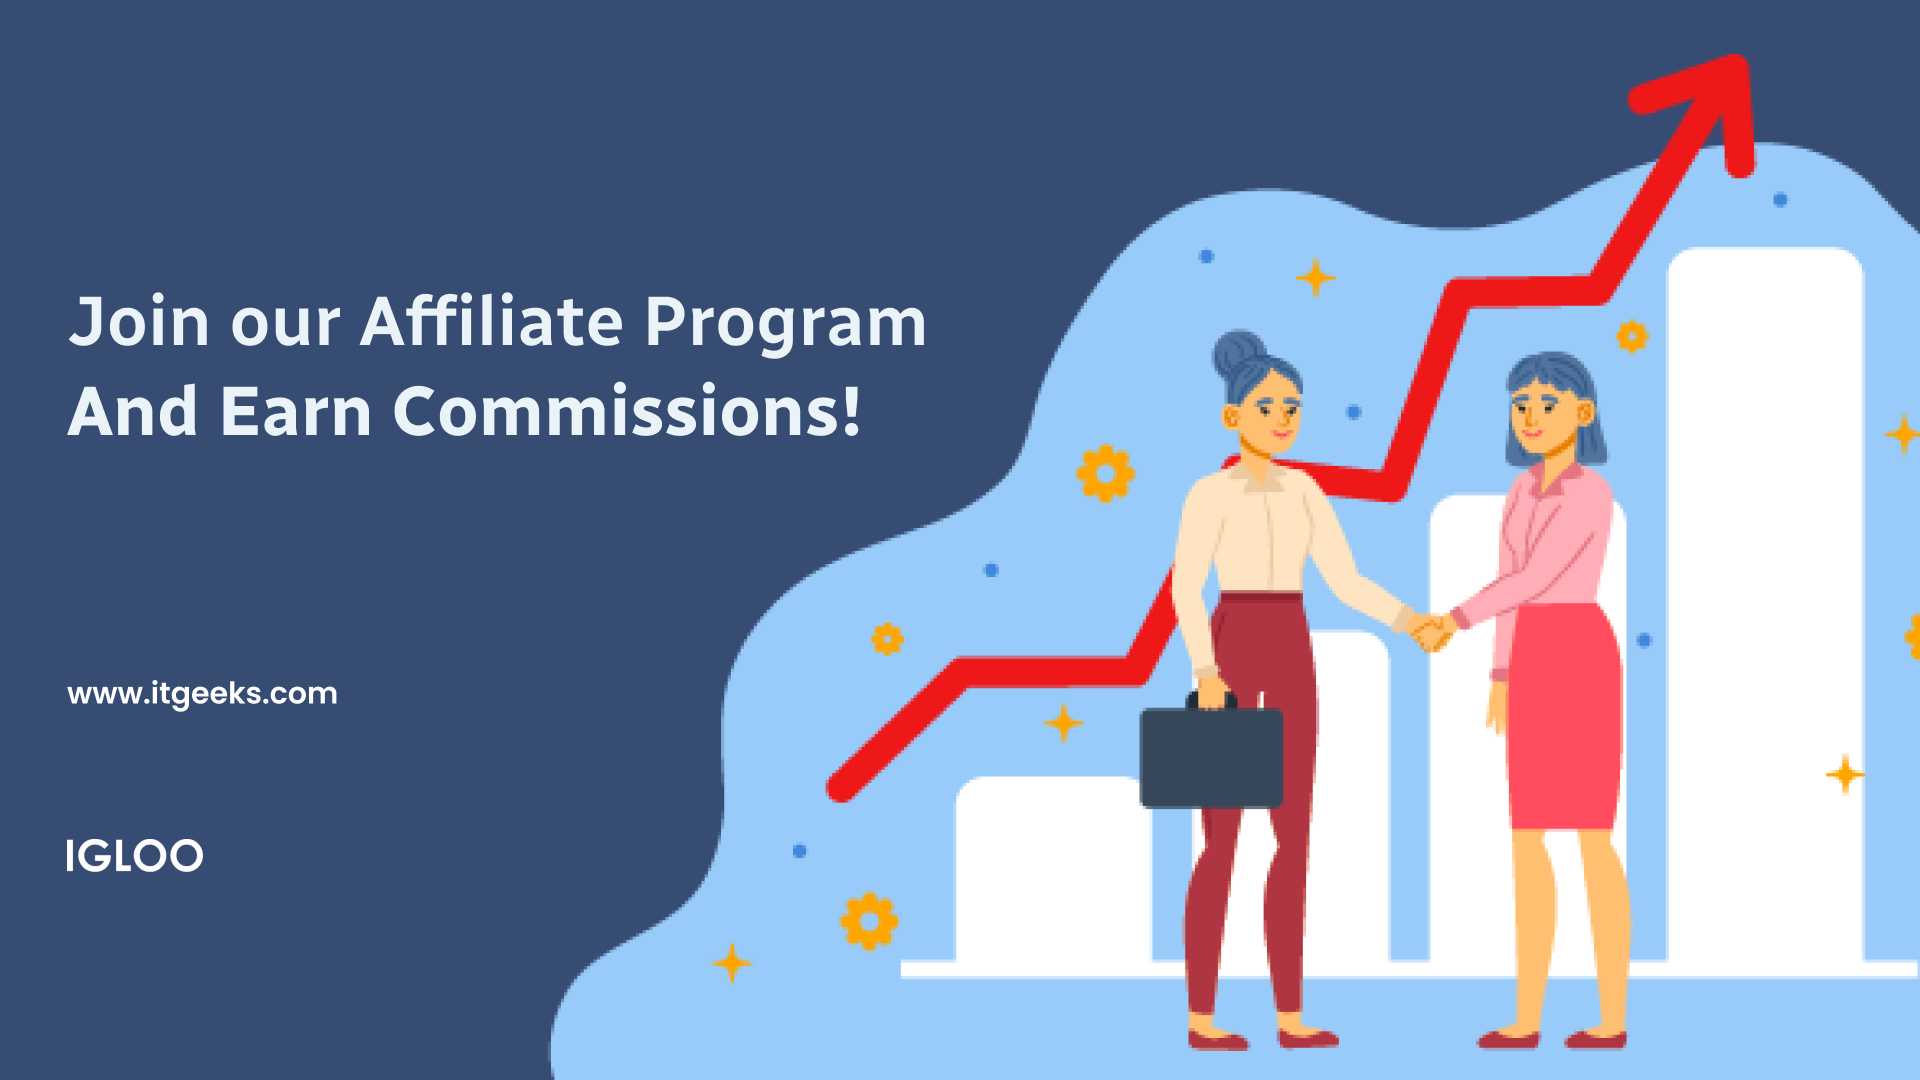 Join our affiliate program and earn commissions!